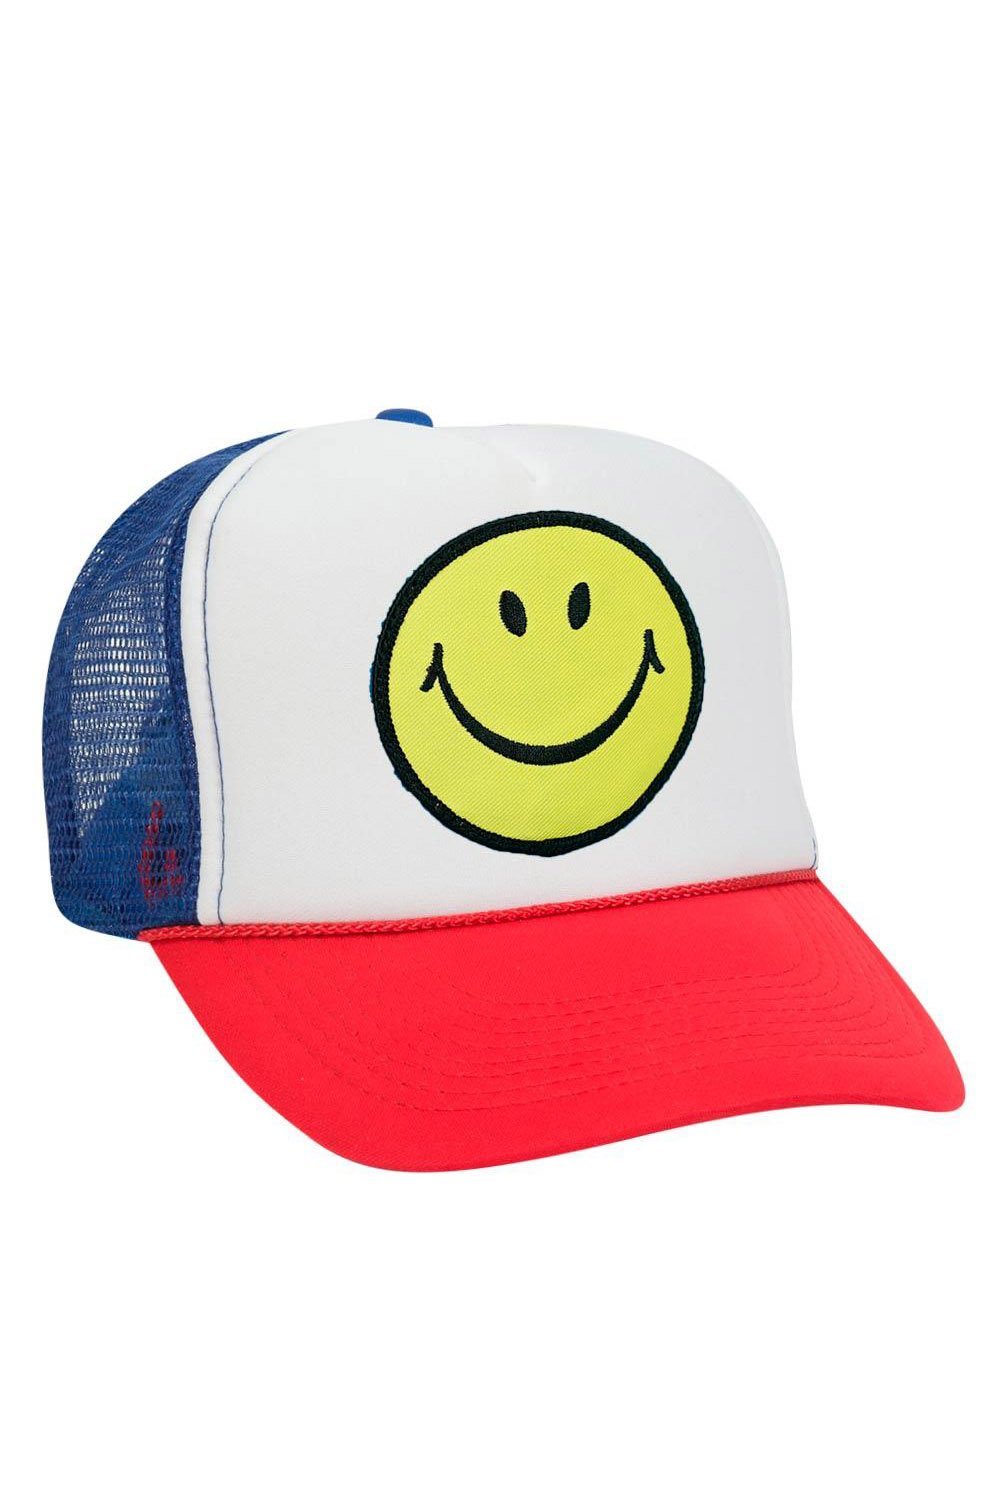 SMILEY VINTAGE TRUCKER HAT HATS Aviator Nation OS RED/WHITE/ROYAL 